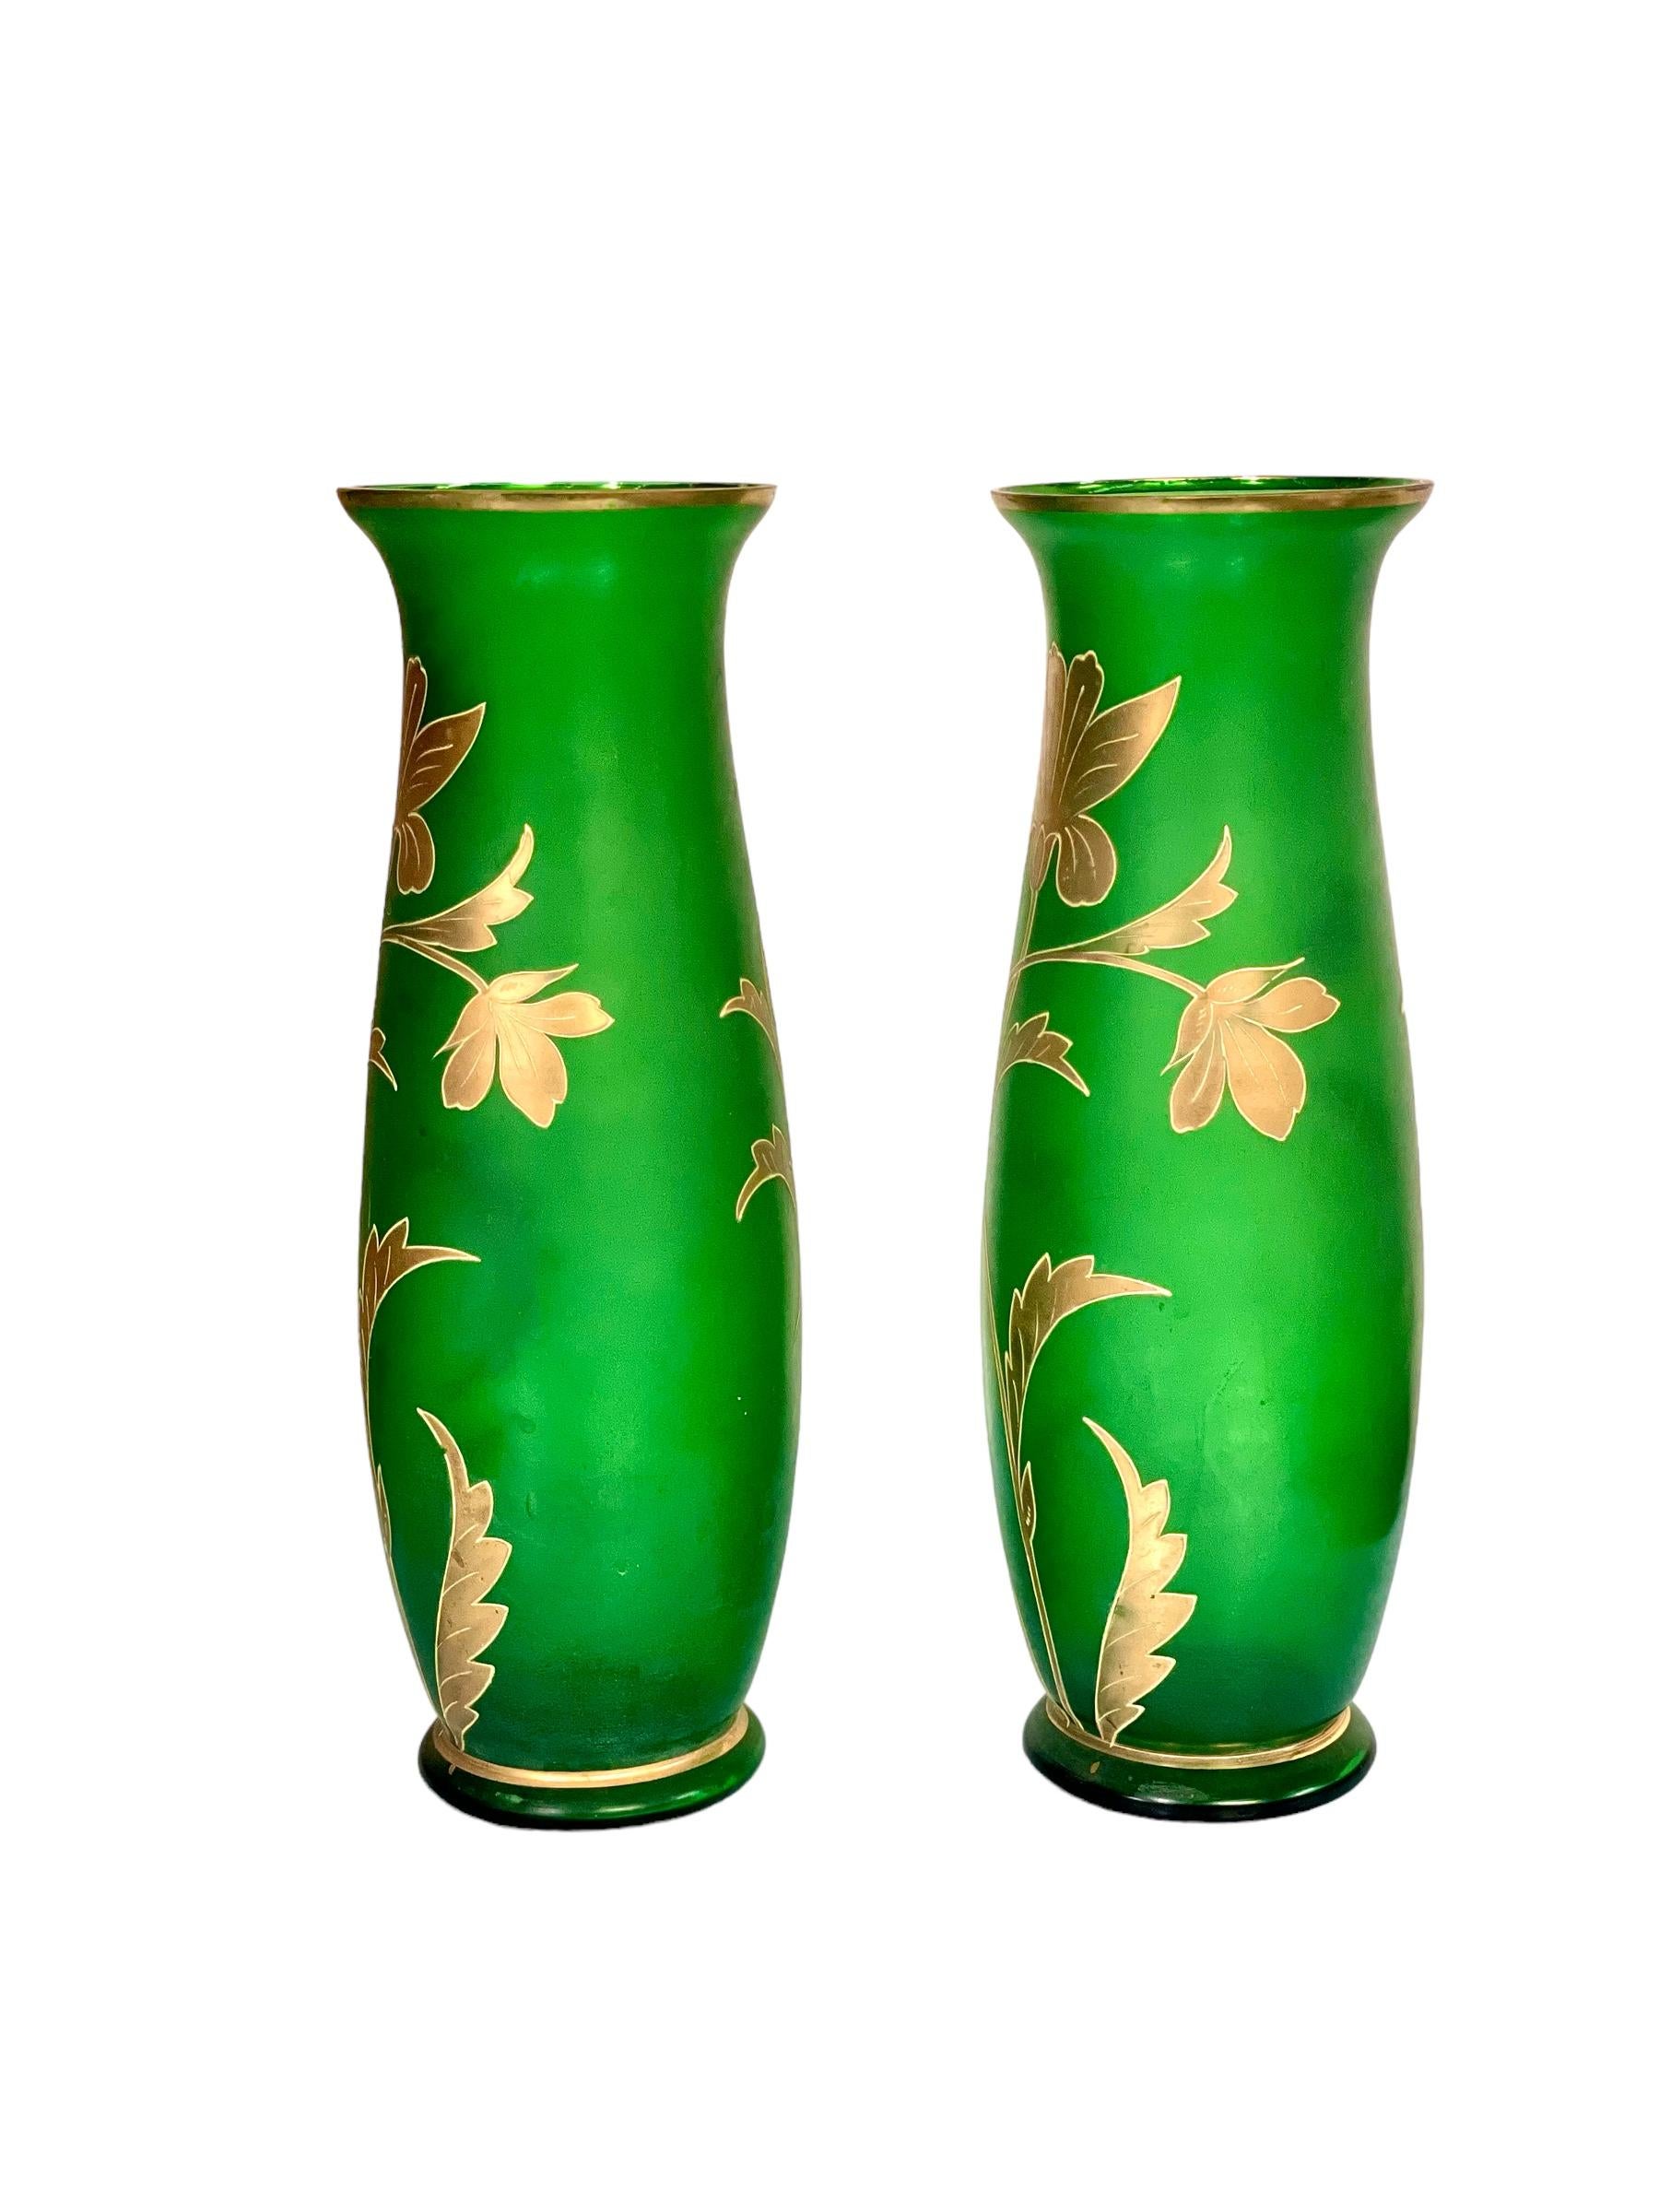 A simply beautiful pair of tulip-shaped Bohemian glass vases in emerald green, in the Art Nouveau style. Dating from the end of the 19th Century, these stunning vases feature an uncomplicated design of spring flowers and foliage in applied enamel